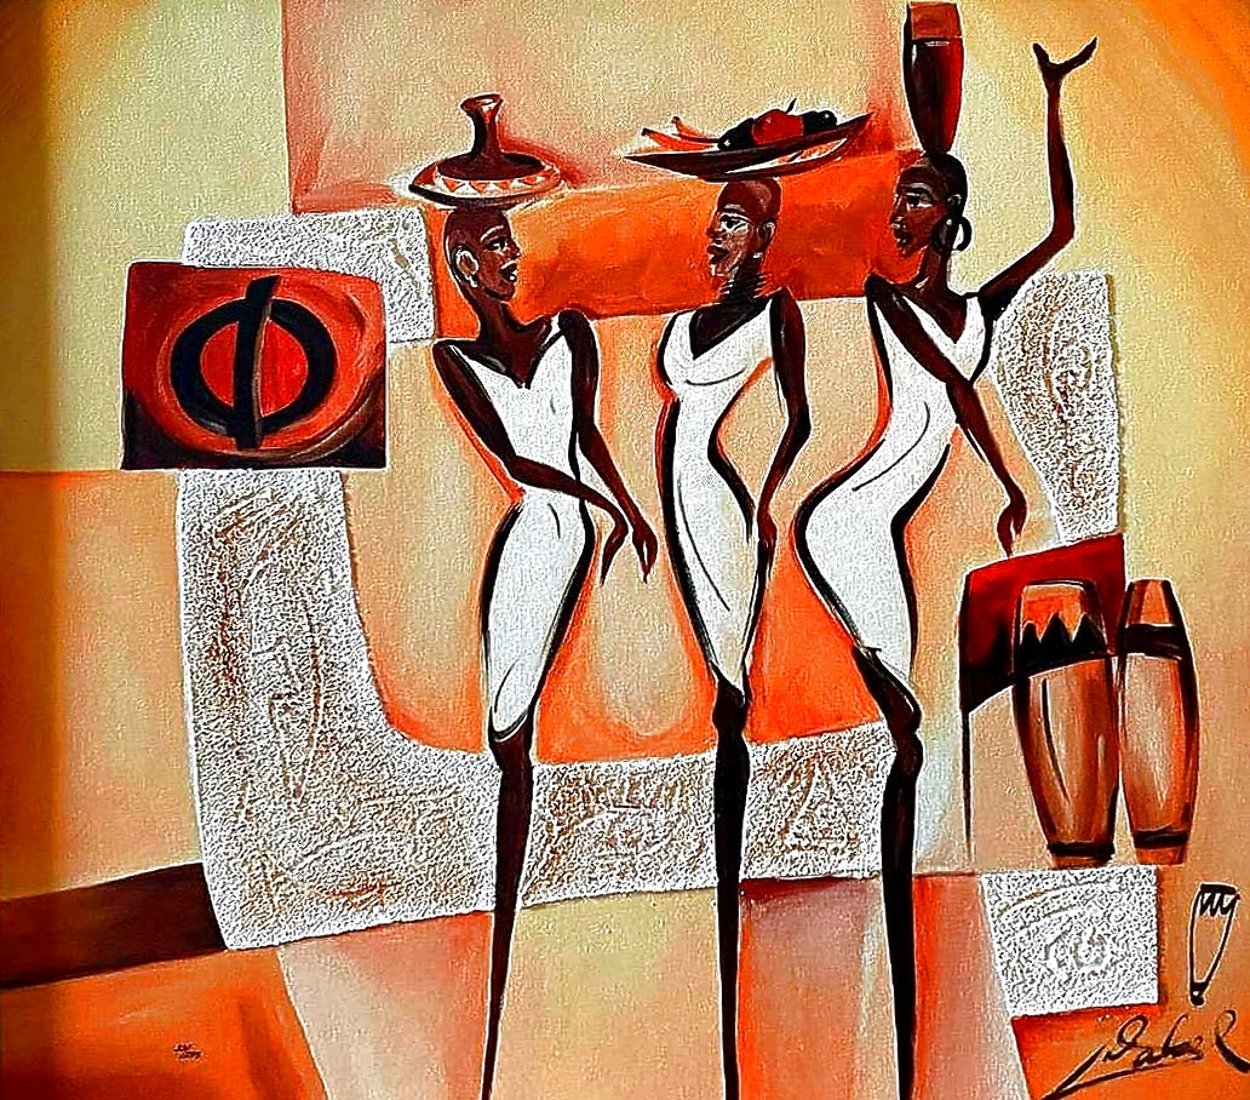 Tribal Banquet Embellished 2006 Limited Edition Print by Alfred Gockel